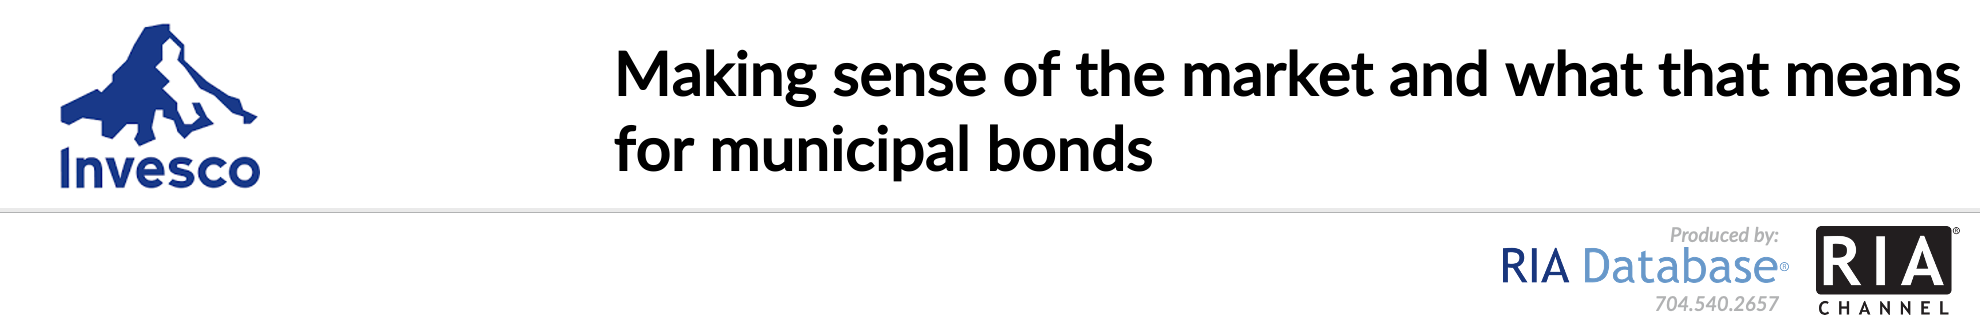 Making sense of the market and what that means for municipal bonds